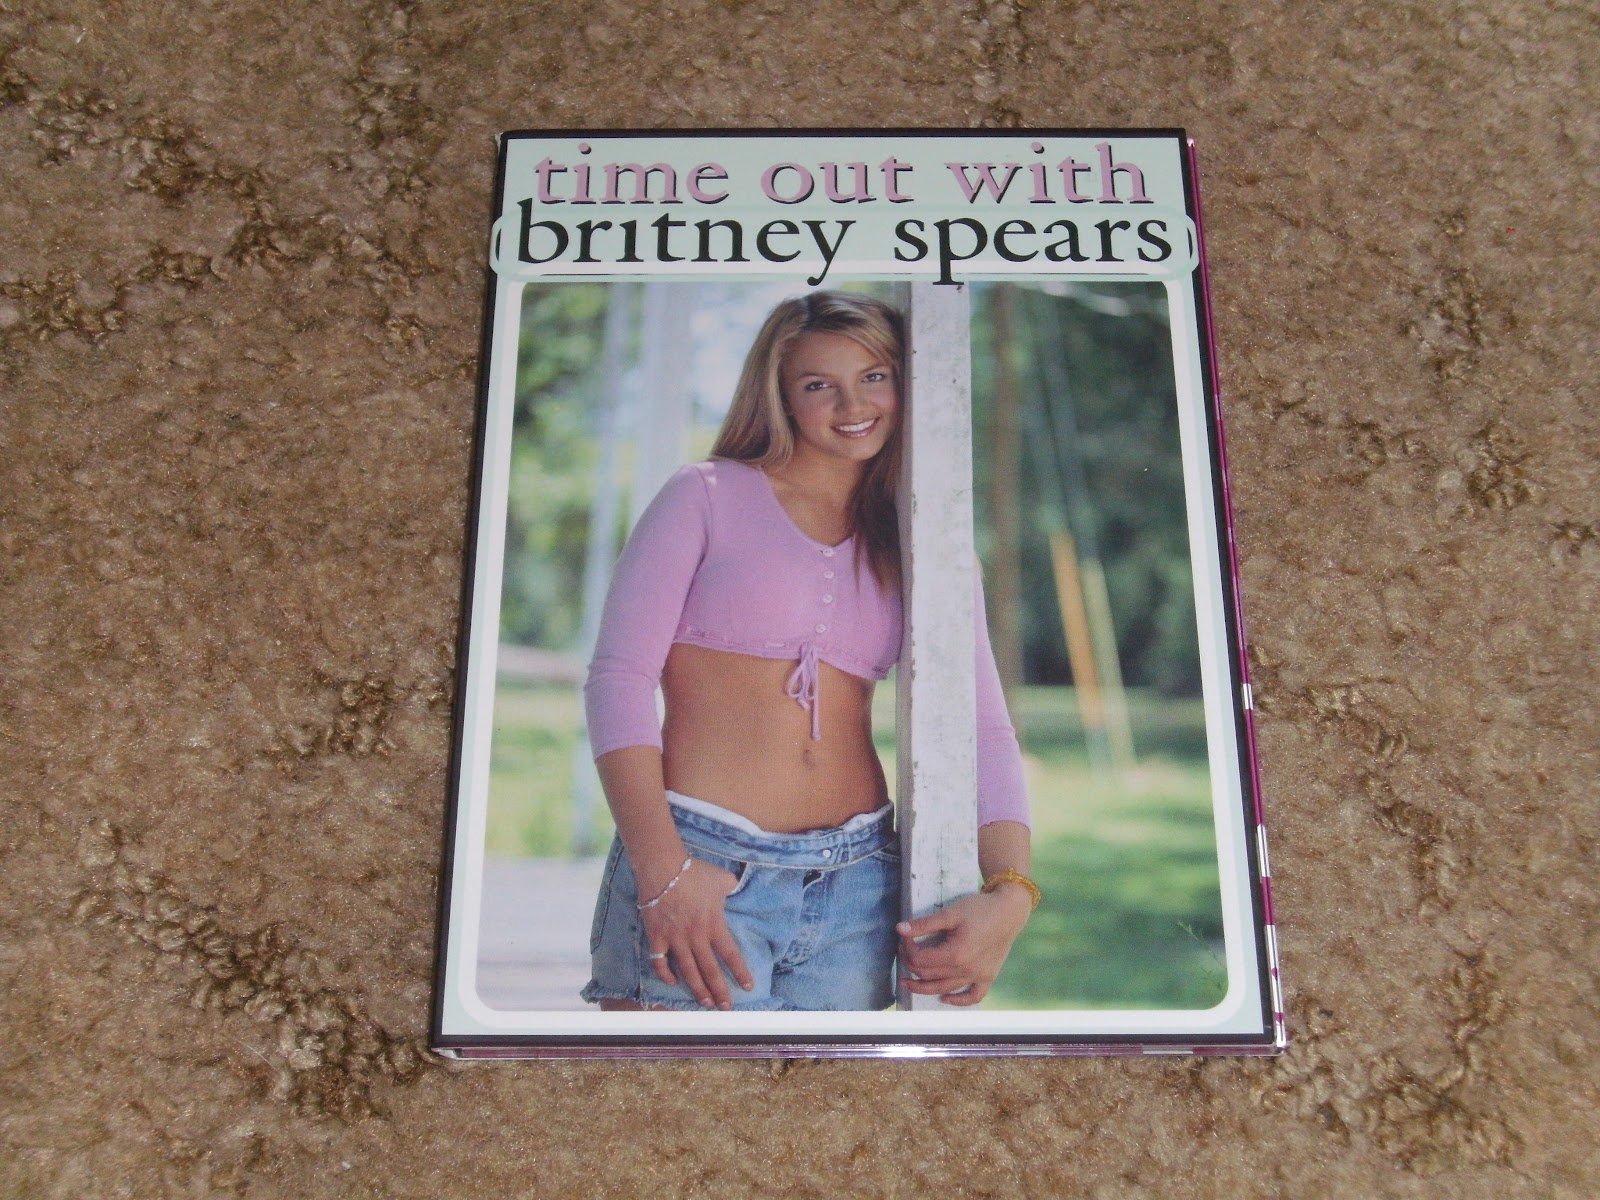 http://3.bp.blogspot.com/-b7Lo6VXTnR8/T9ZuBWyTx-I/AAAAAAAABCE/-TWbgElPvsI/s1600/Time+Out+With+Britney+Spears+(US+DVD+Edition)+1.JPG